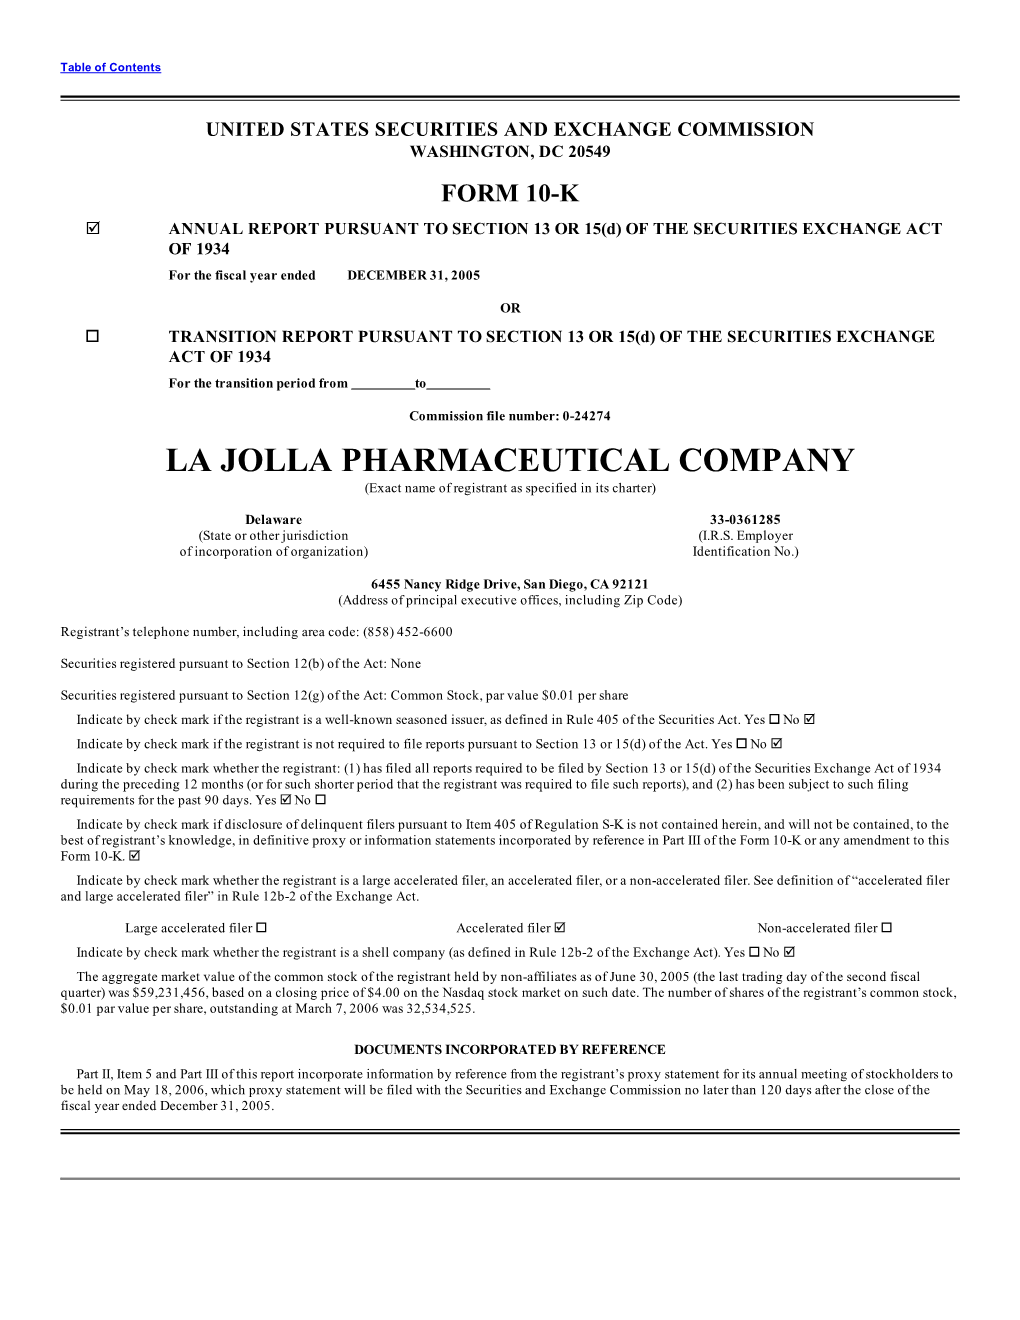 LA JOLLA PHARMACEUTICAL COMPANY (Exact Name of Registrant As Specified in Its Charter)